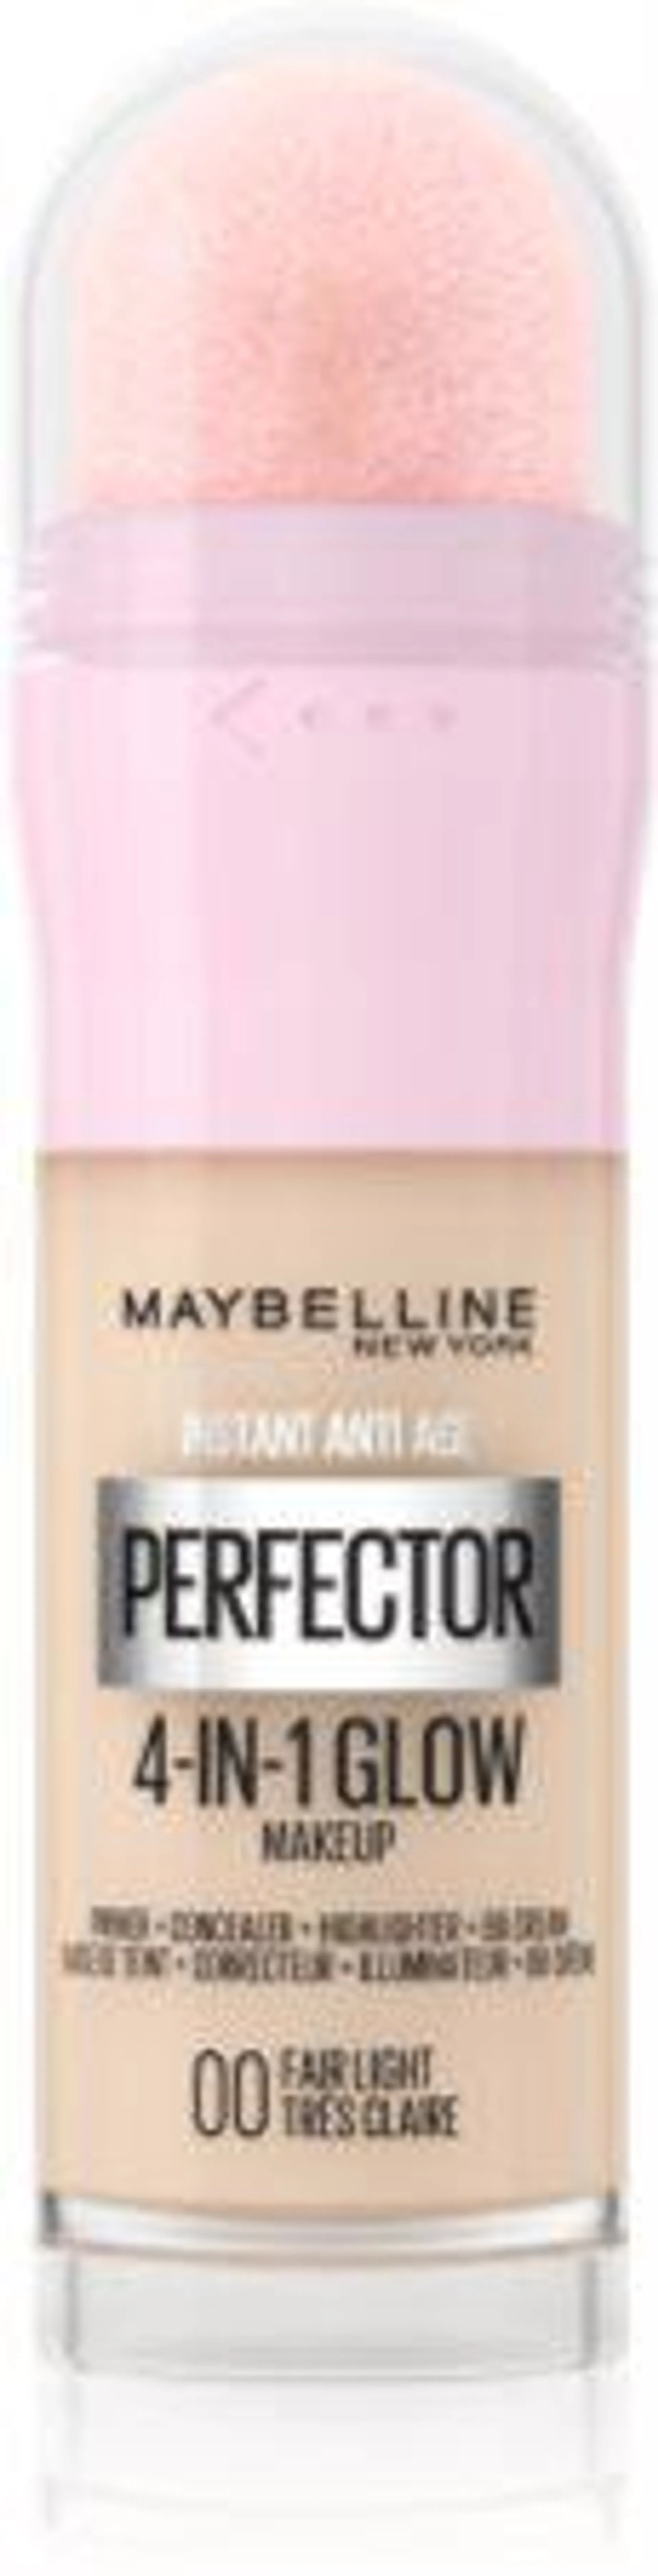 Instant Age Rewind Perfector 4-in-1 Glow